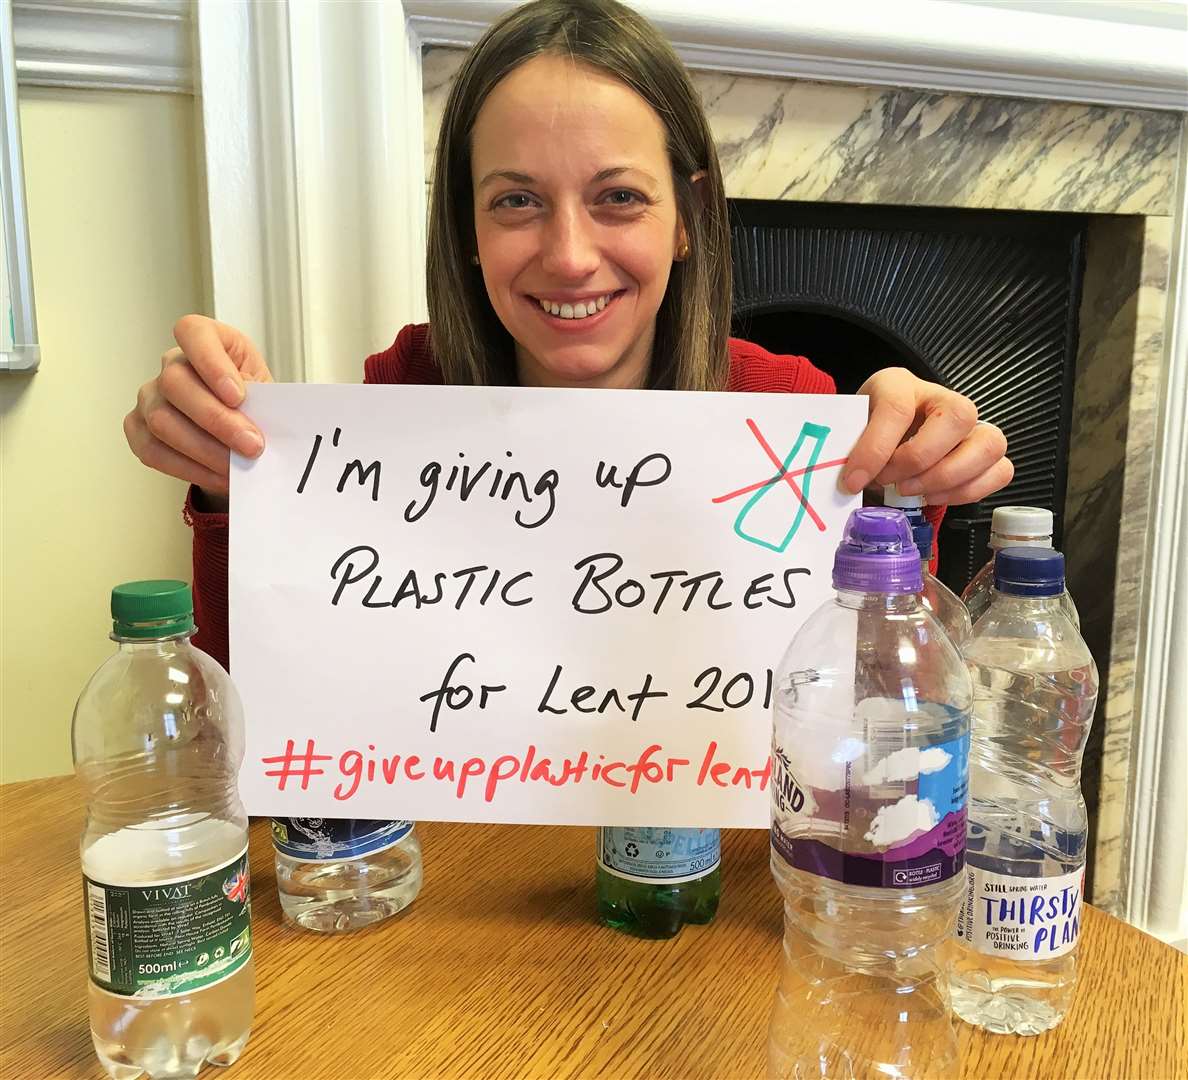 MP Helen Whately said no to plastic bottles for Lent. Picture: Helen Whately